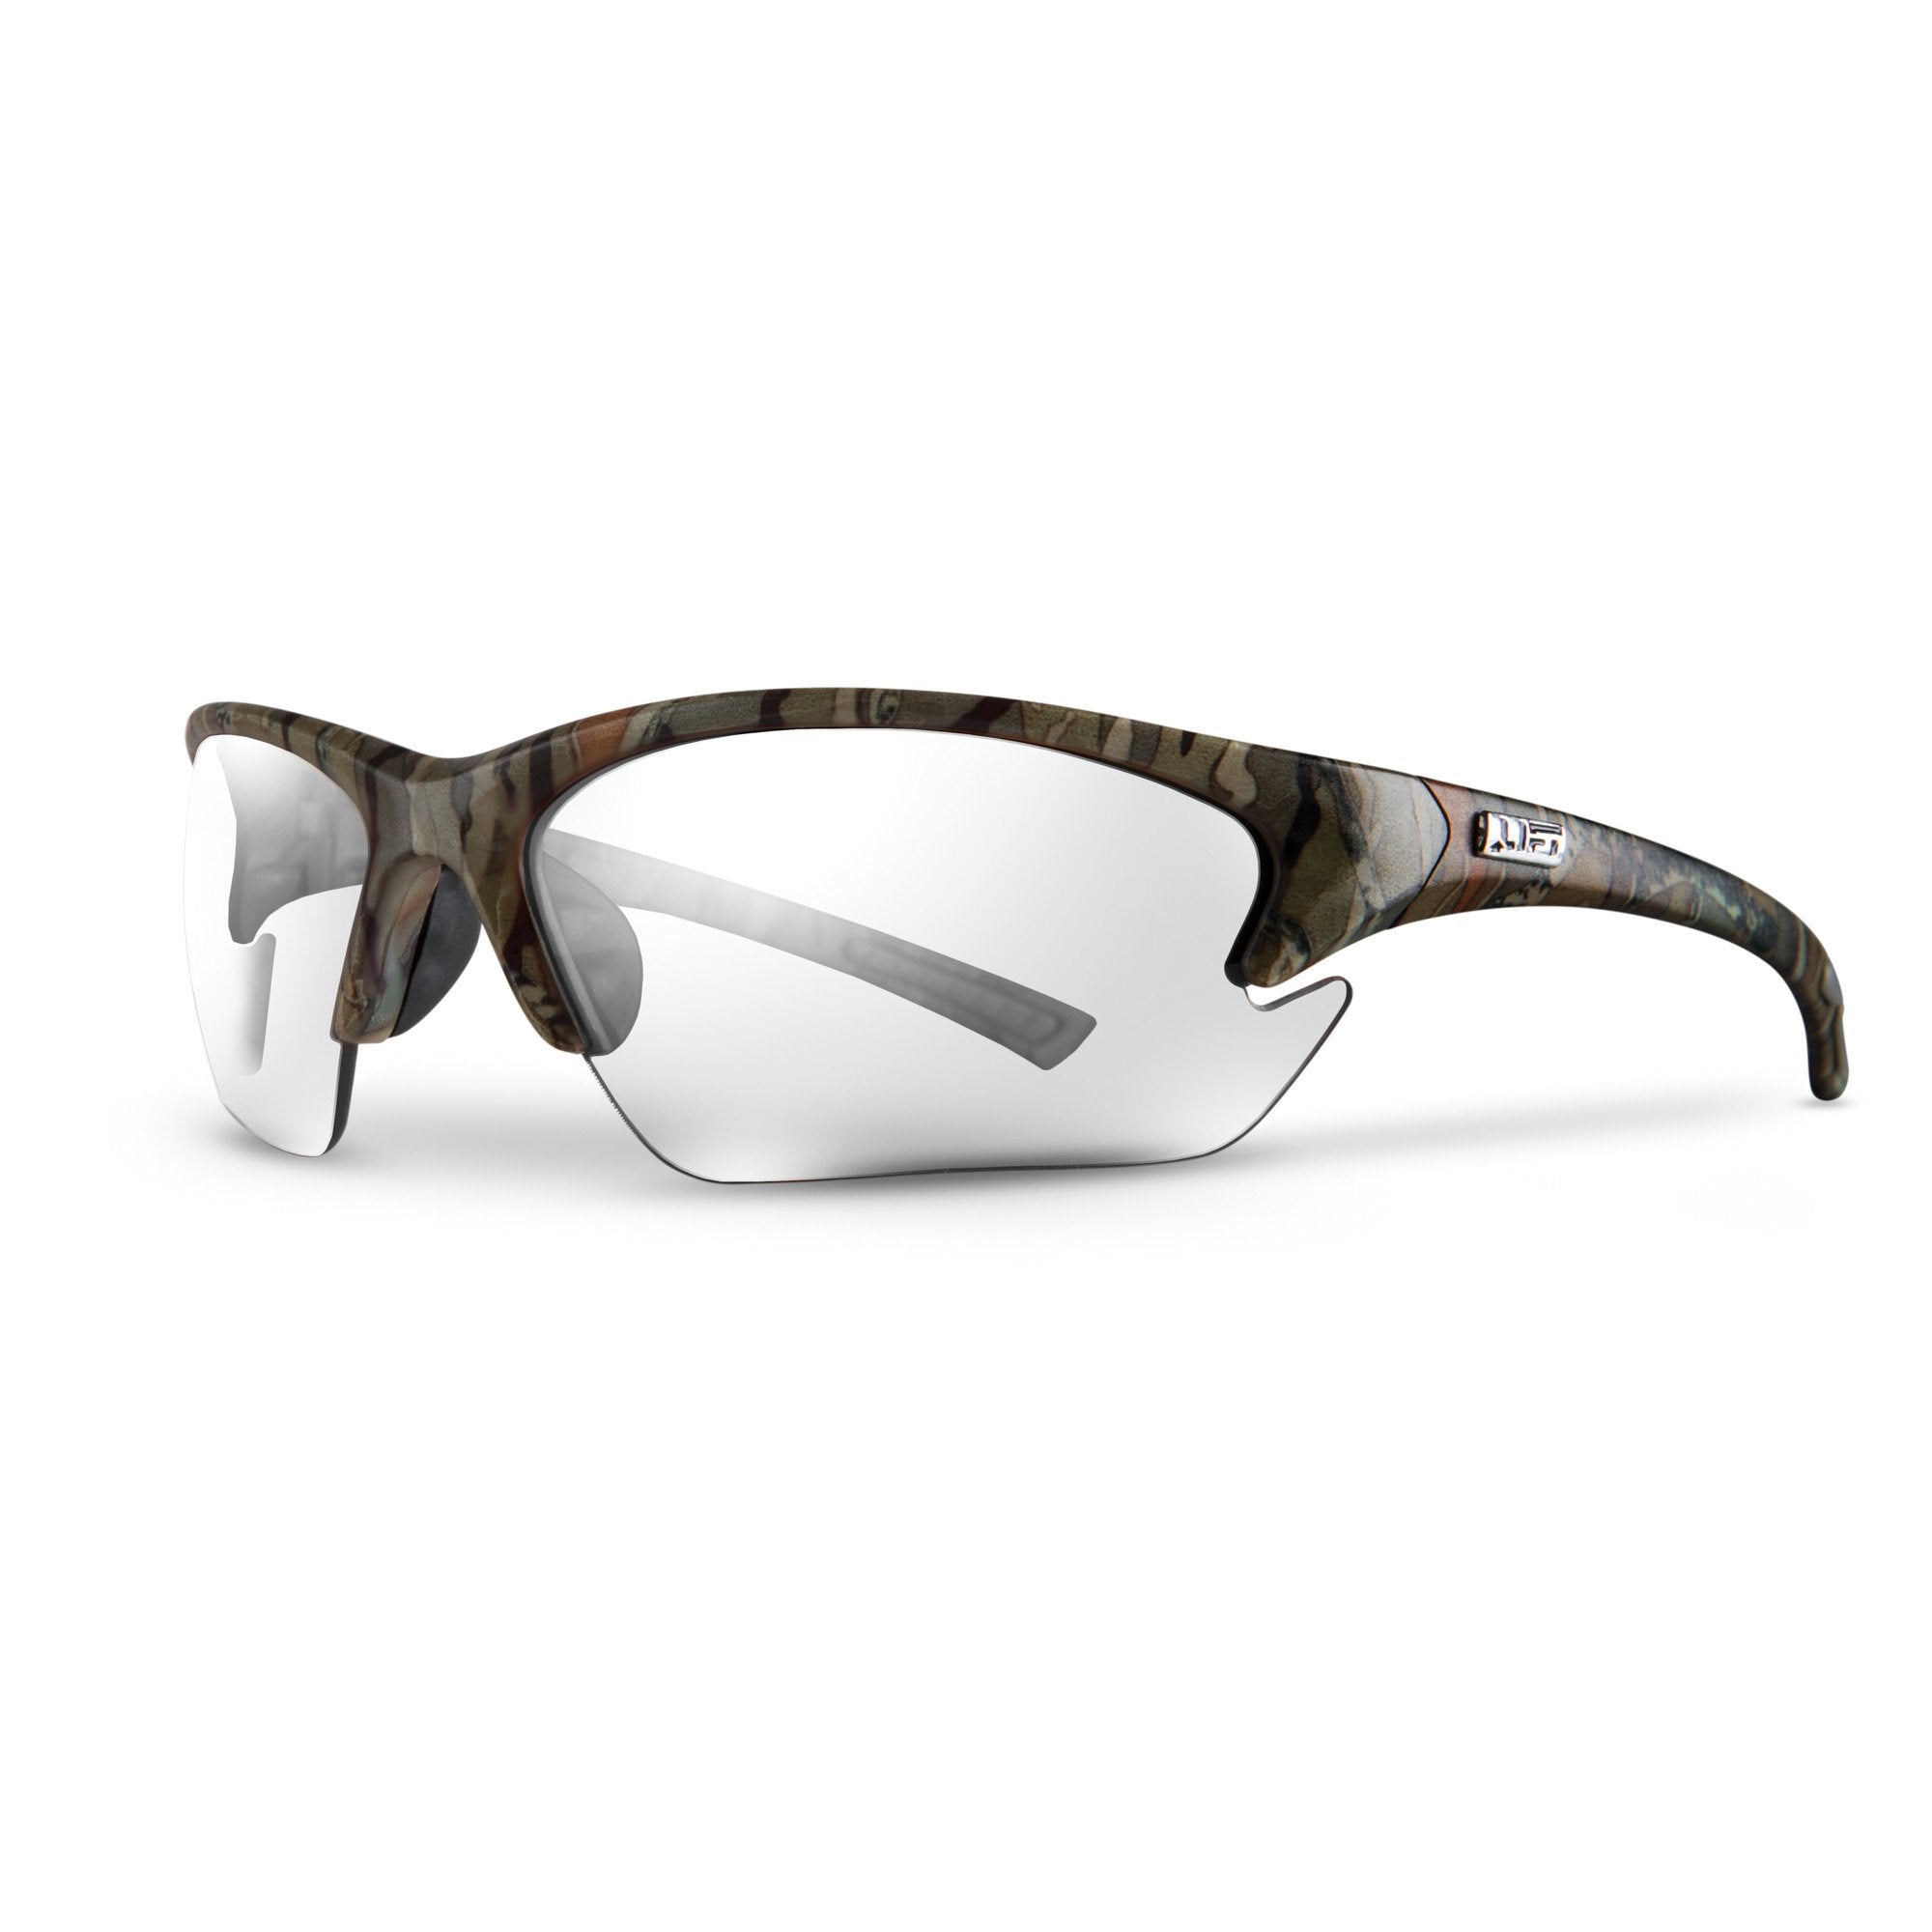 QUEST Safety Glasses - Camo - LIFT Aviation